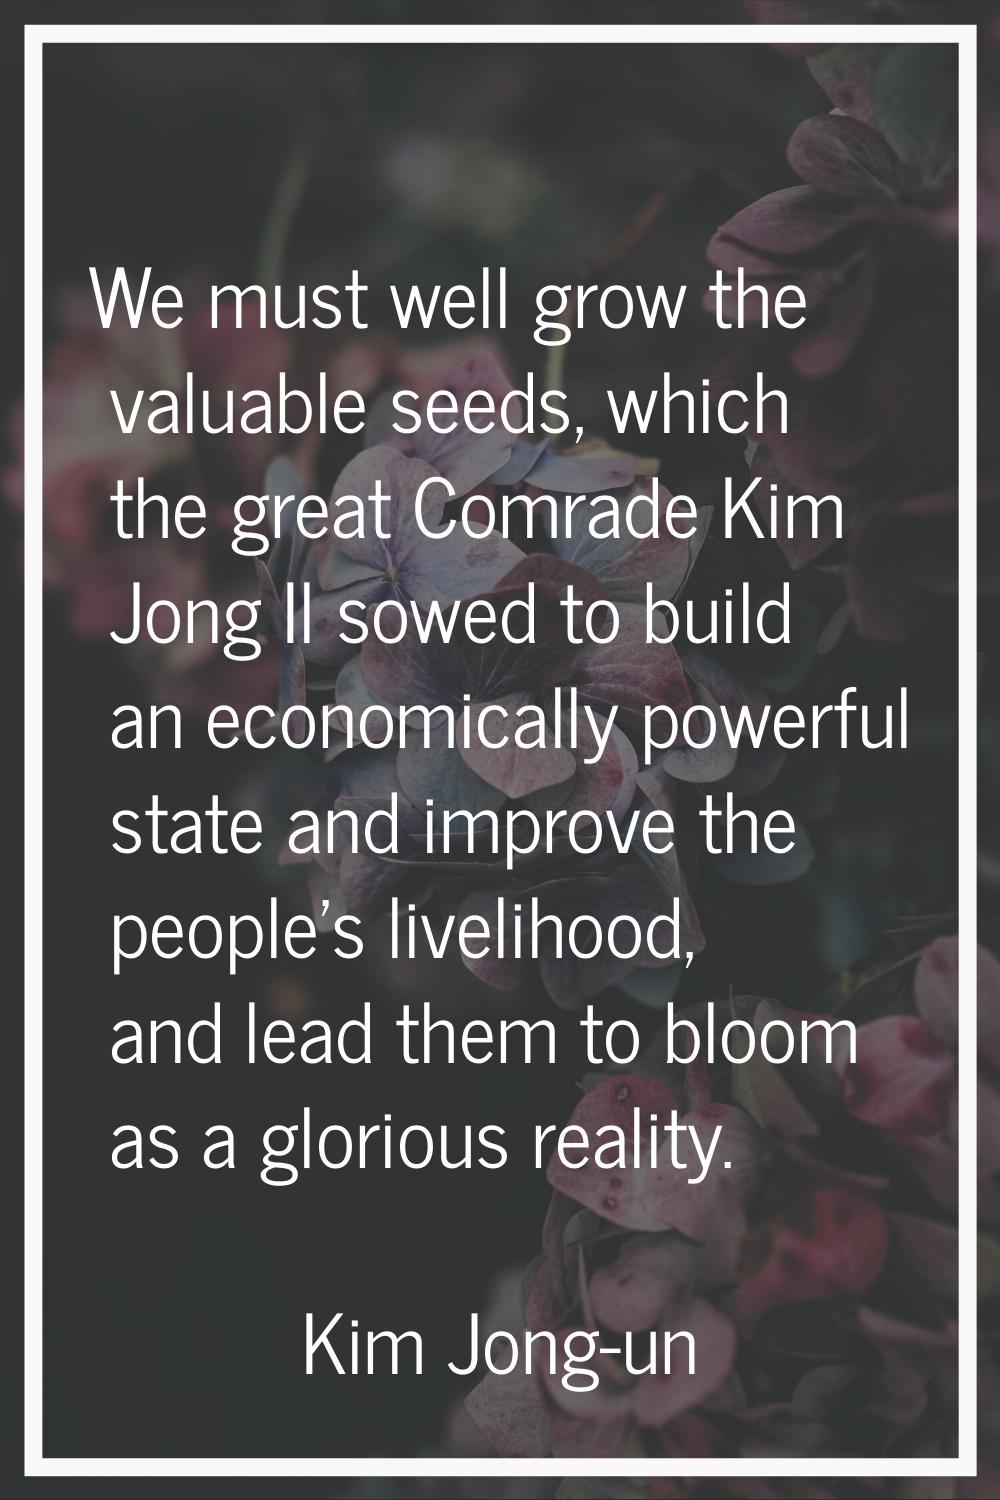 We must well grow the valuable seeds, which the great Comrade Kim Jong Il sowed to build an economi